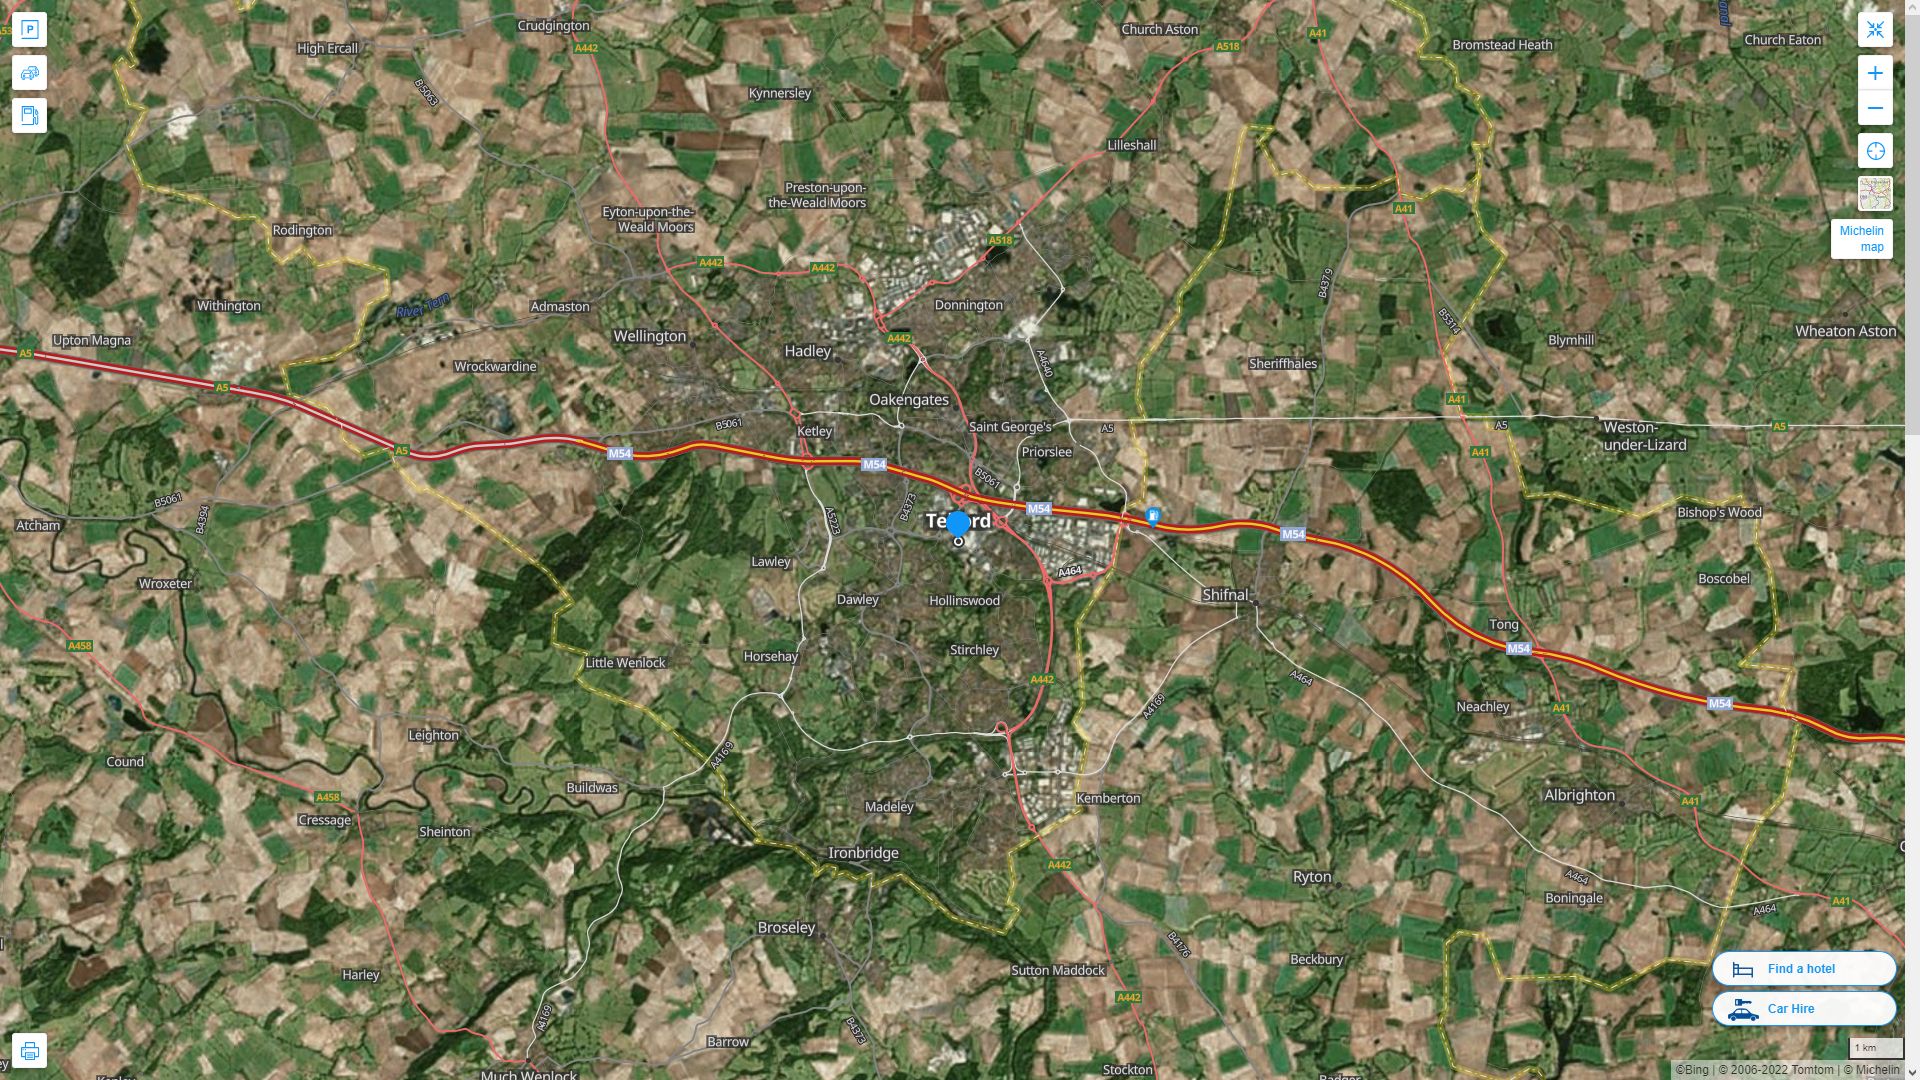 Telford Highway and Road Map with Satellite View